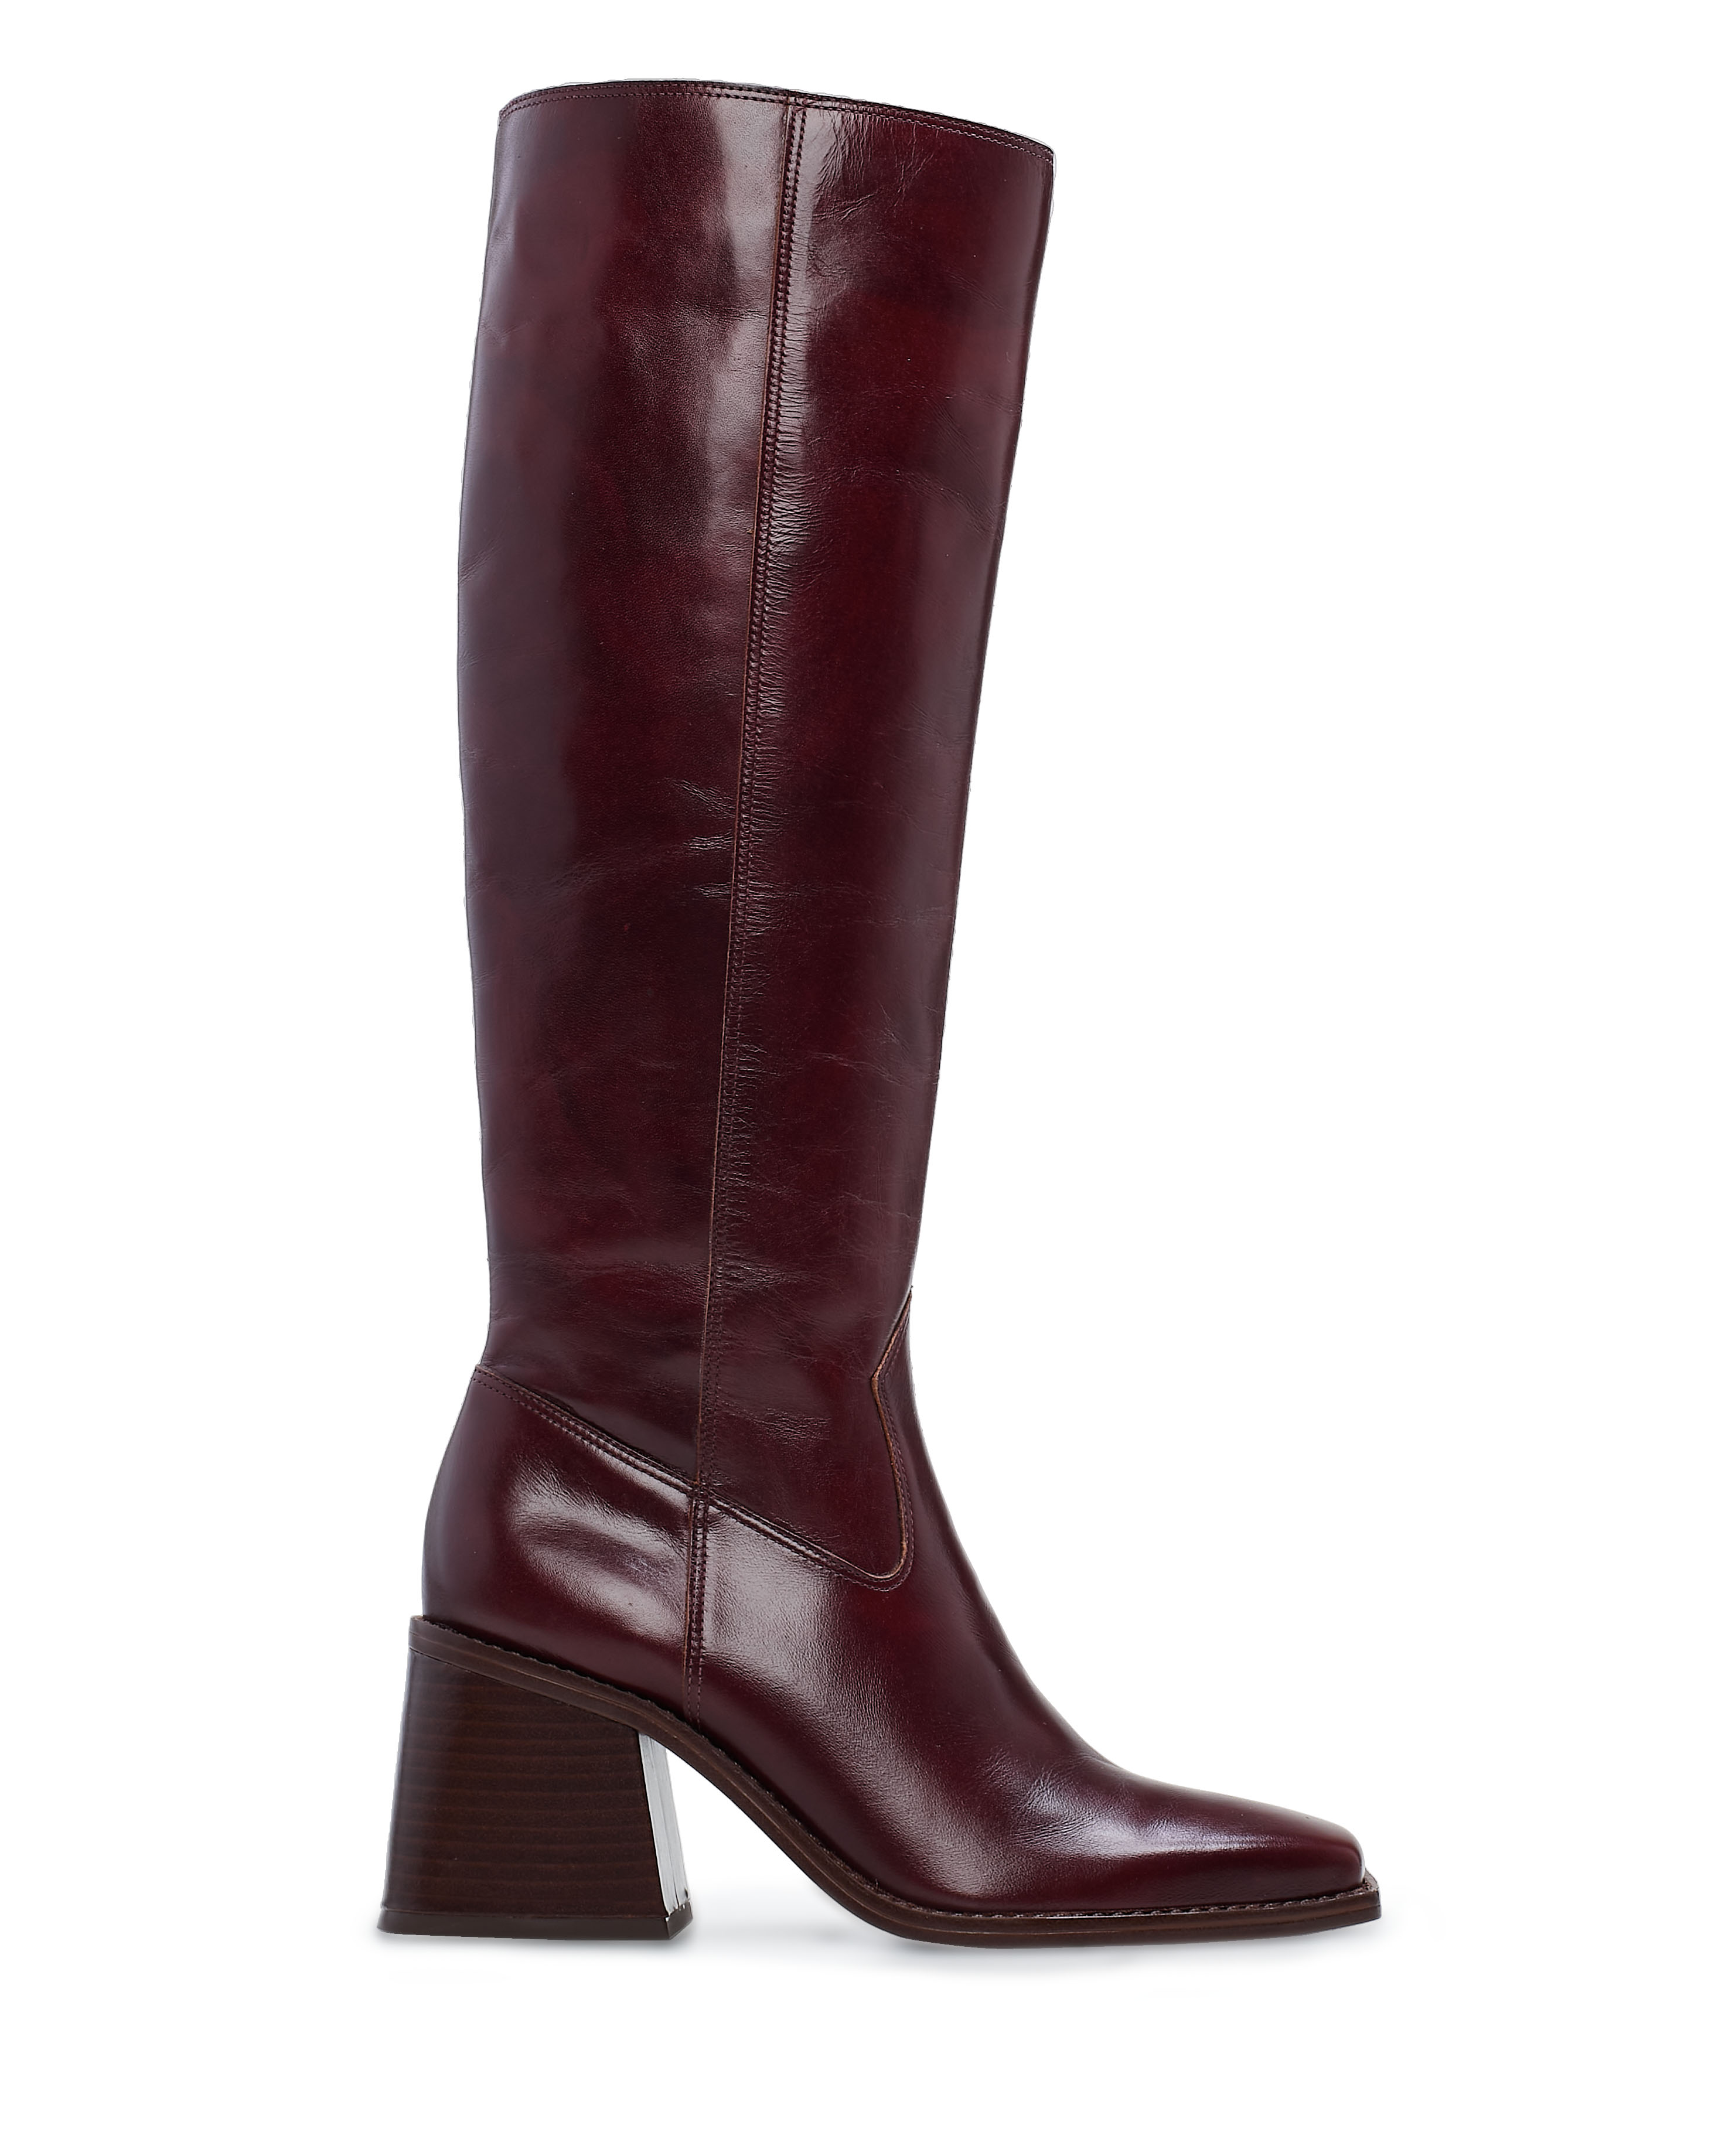 Vince Camuto Sangeti Wide-Calf Boot